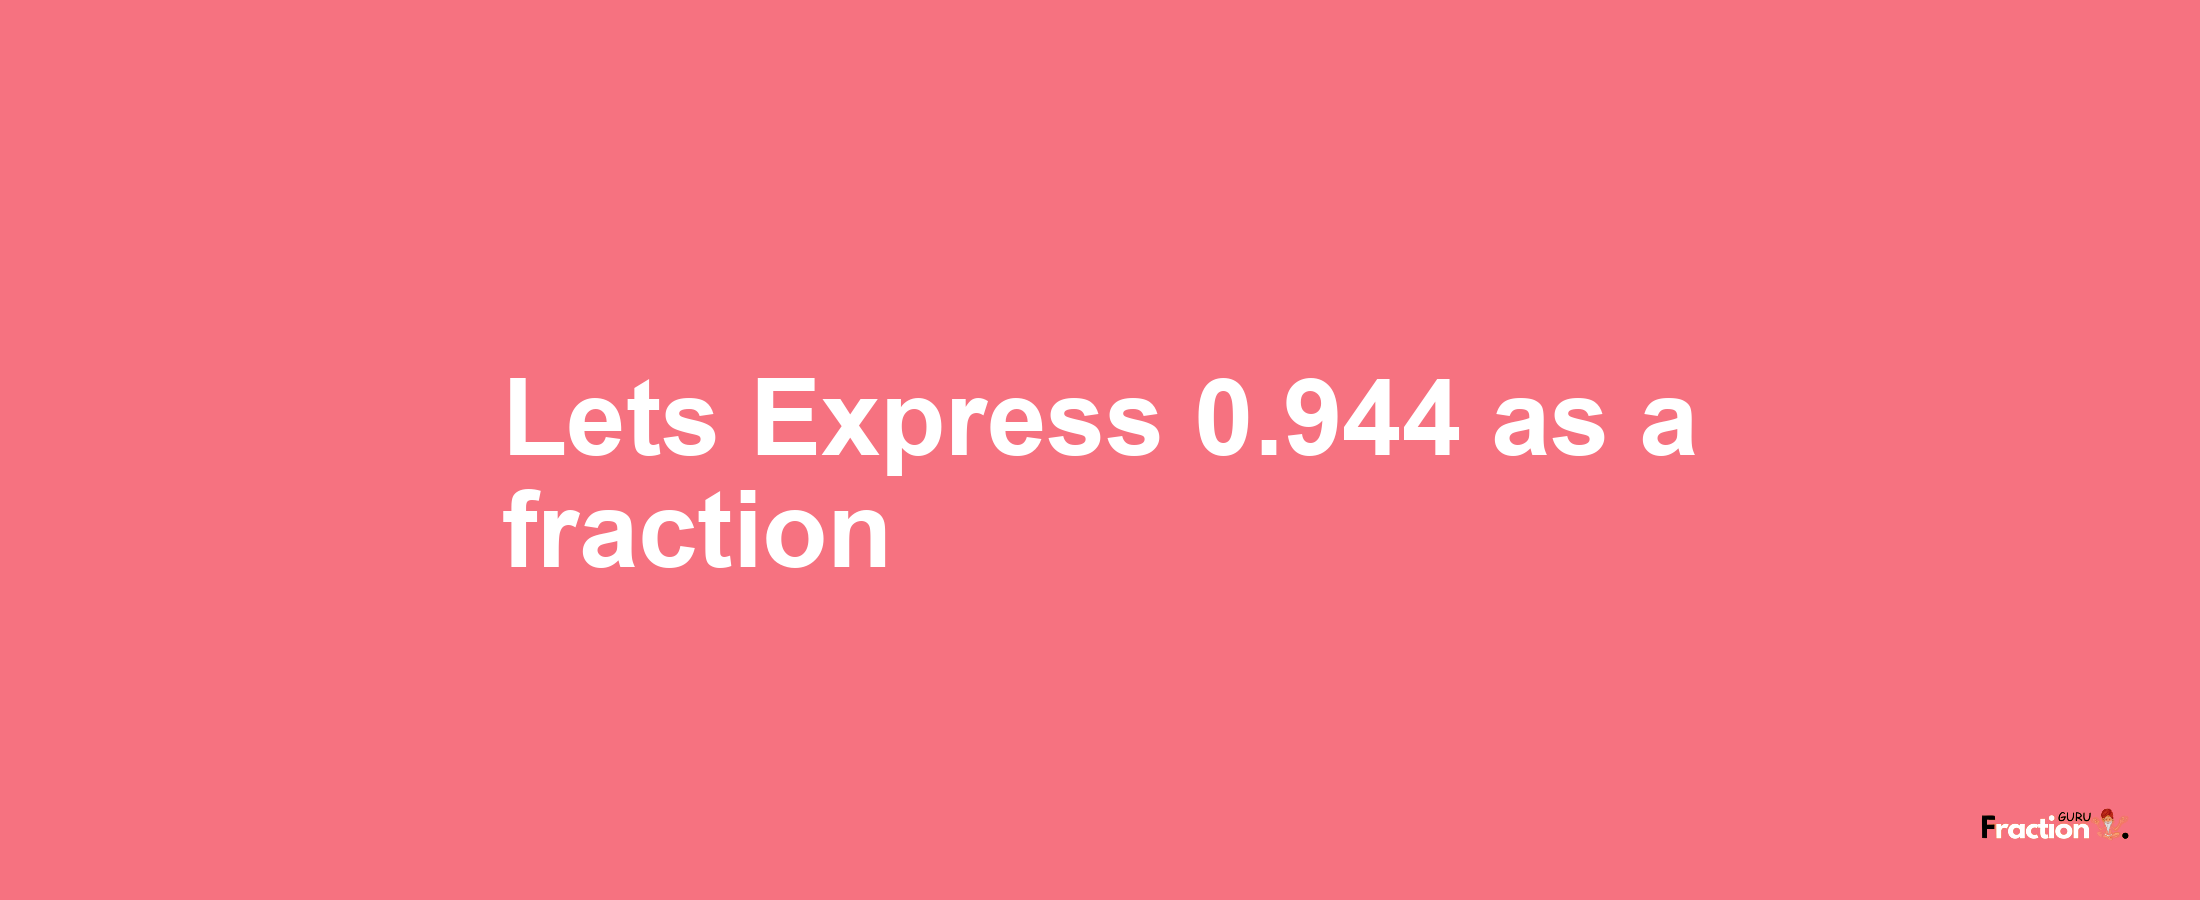 Lets Express 0.944 as afraction